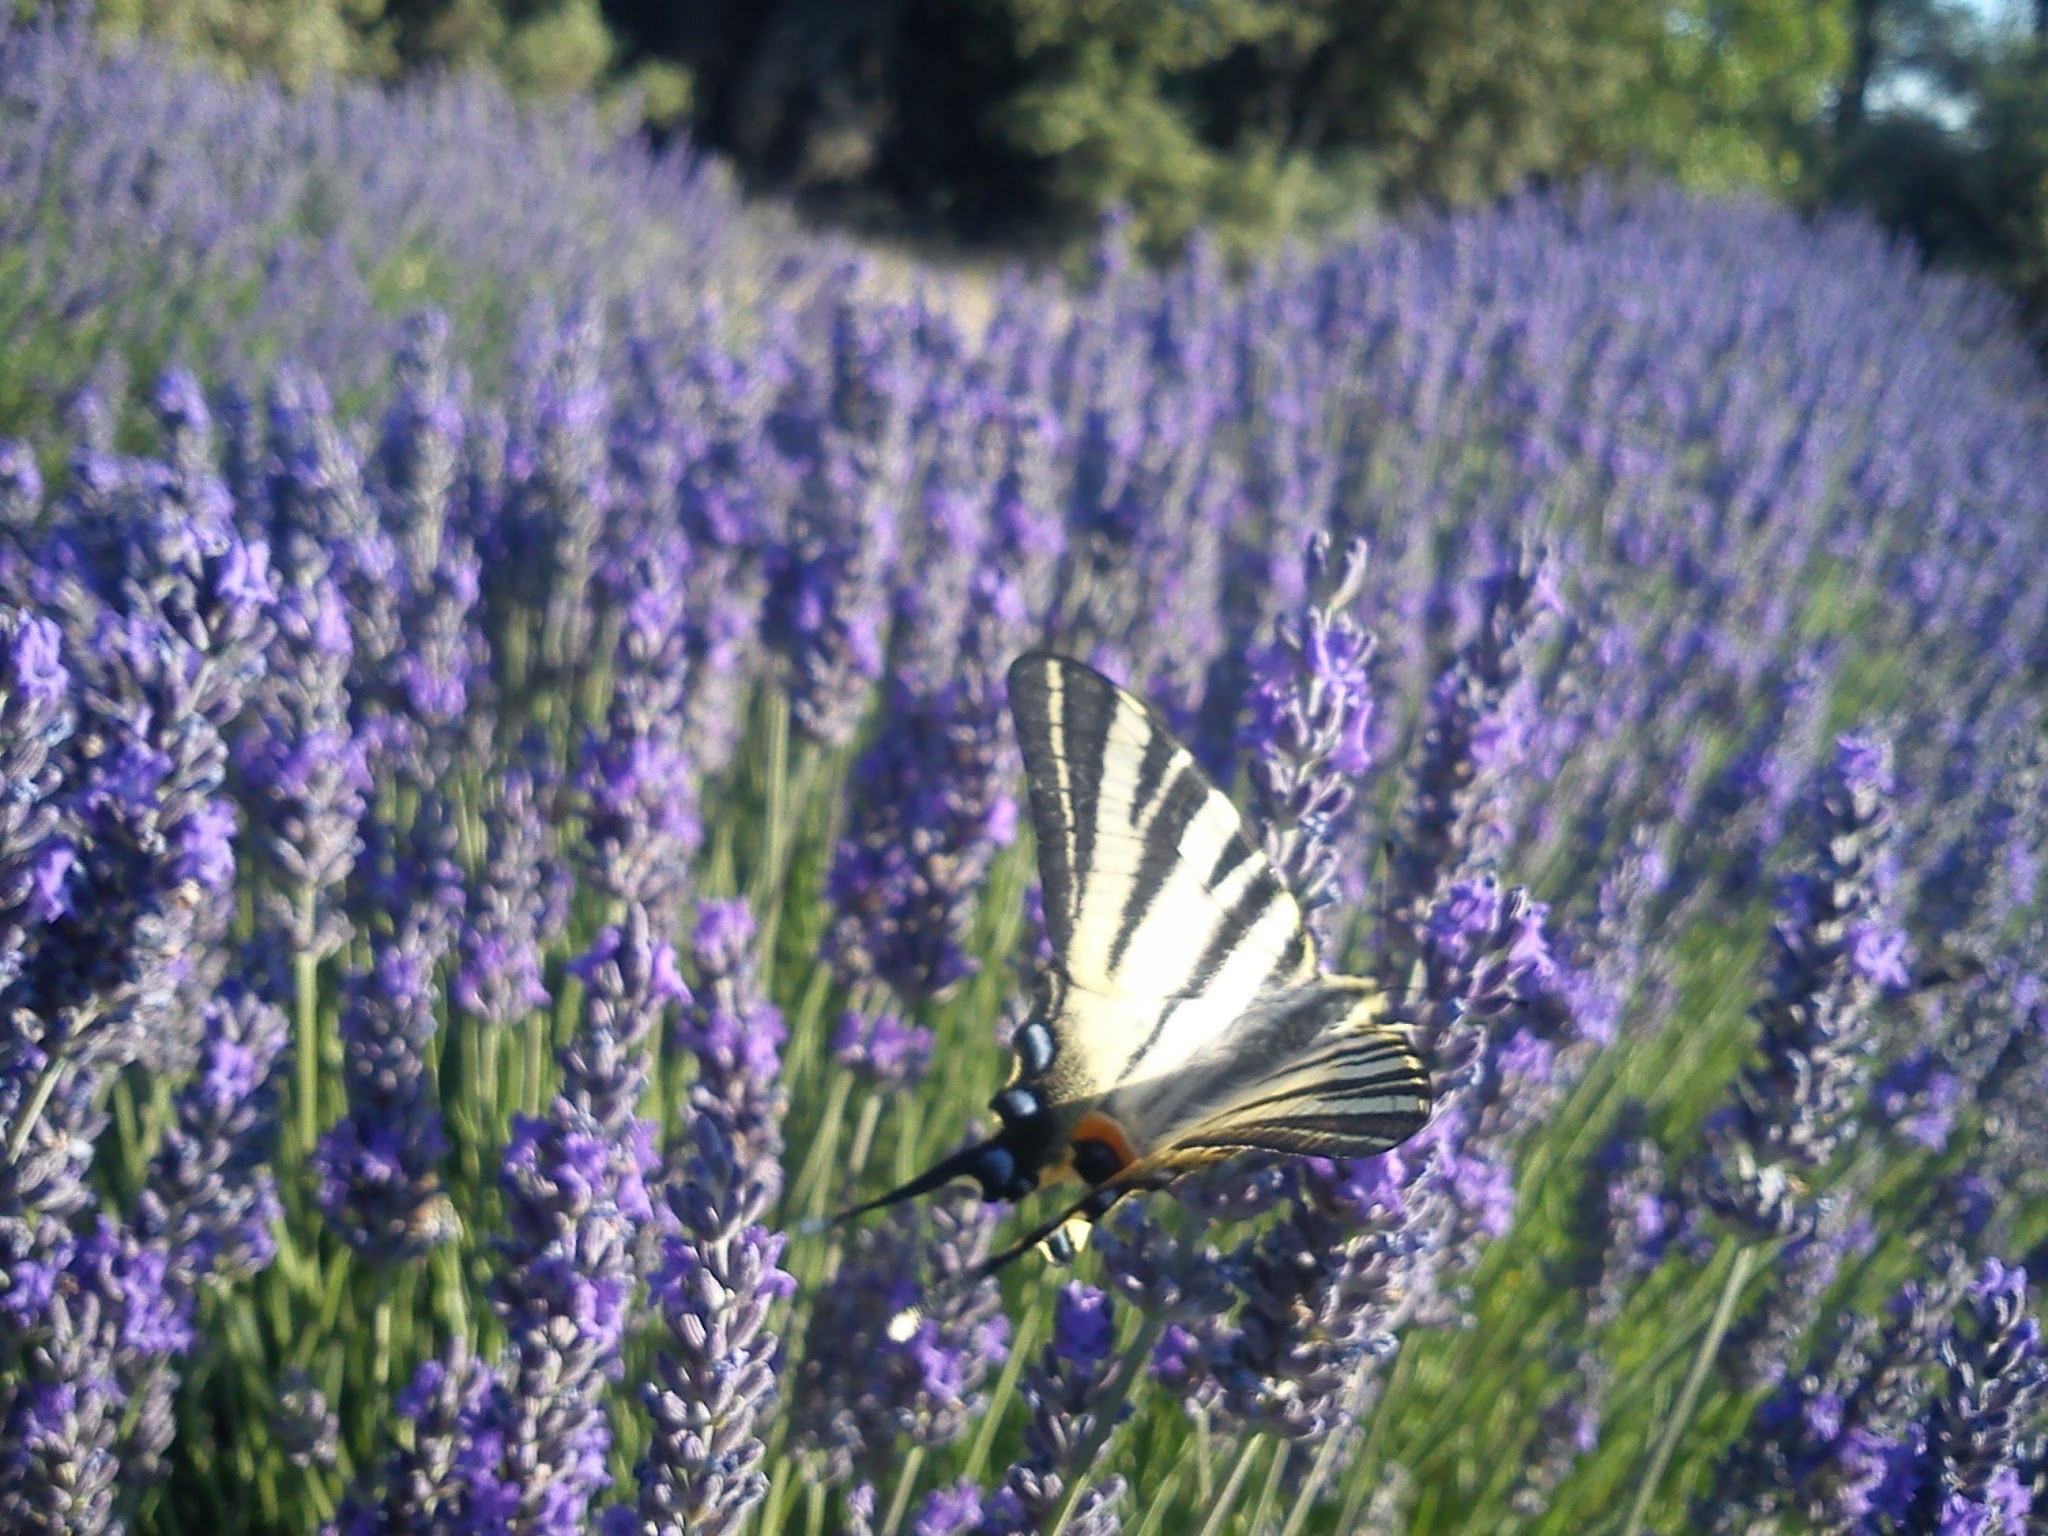 Swallowtail butterfly landed on lavender